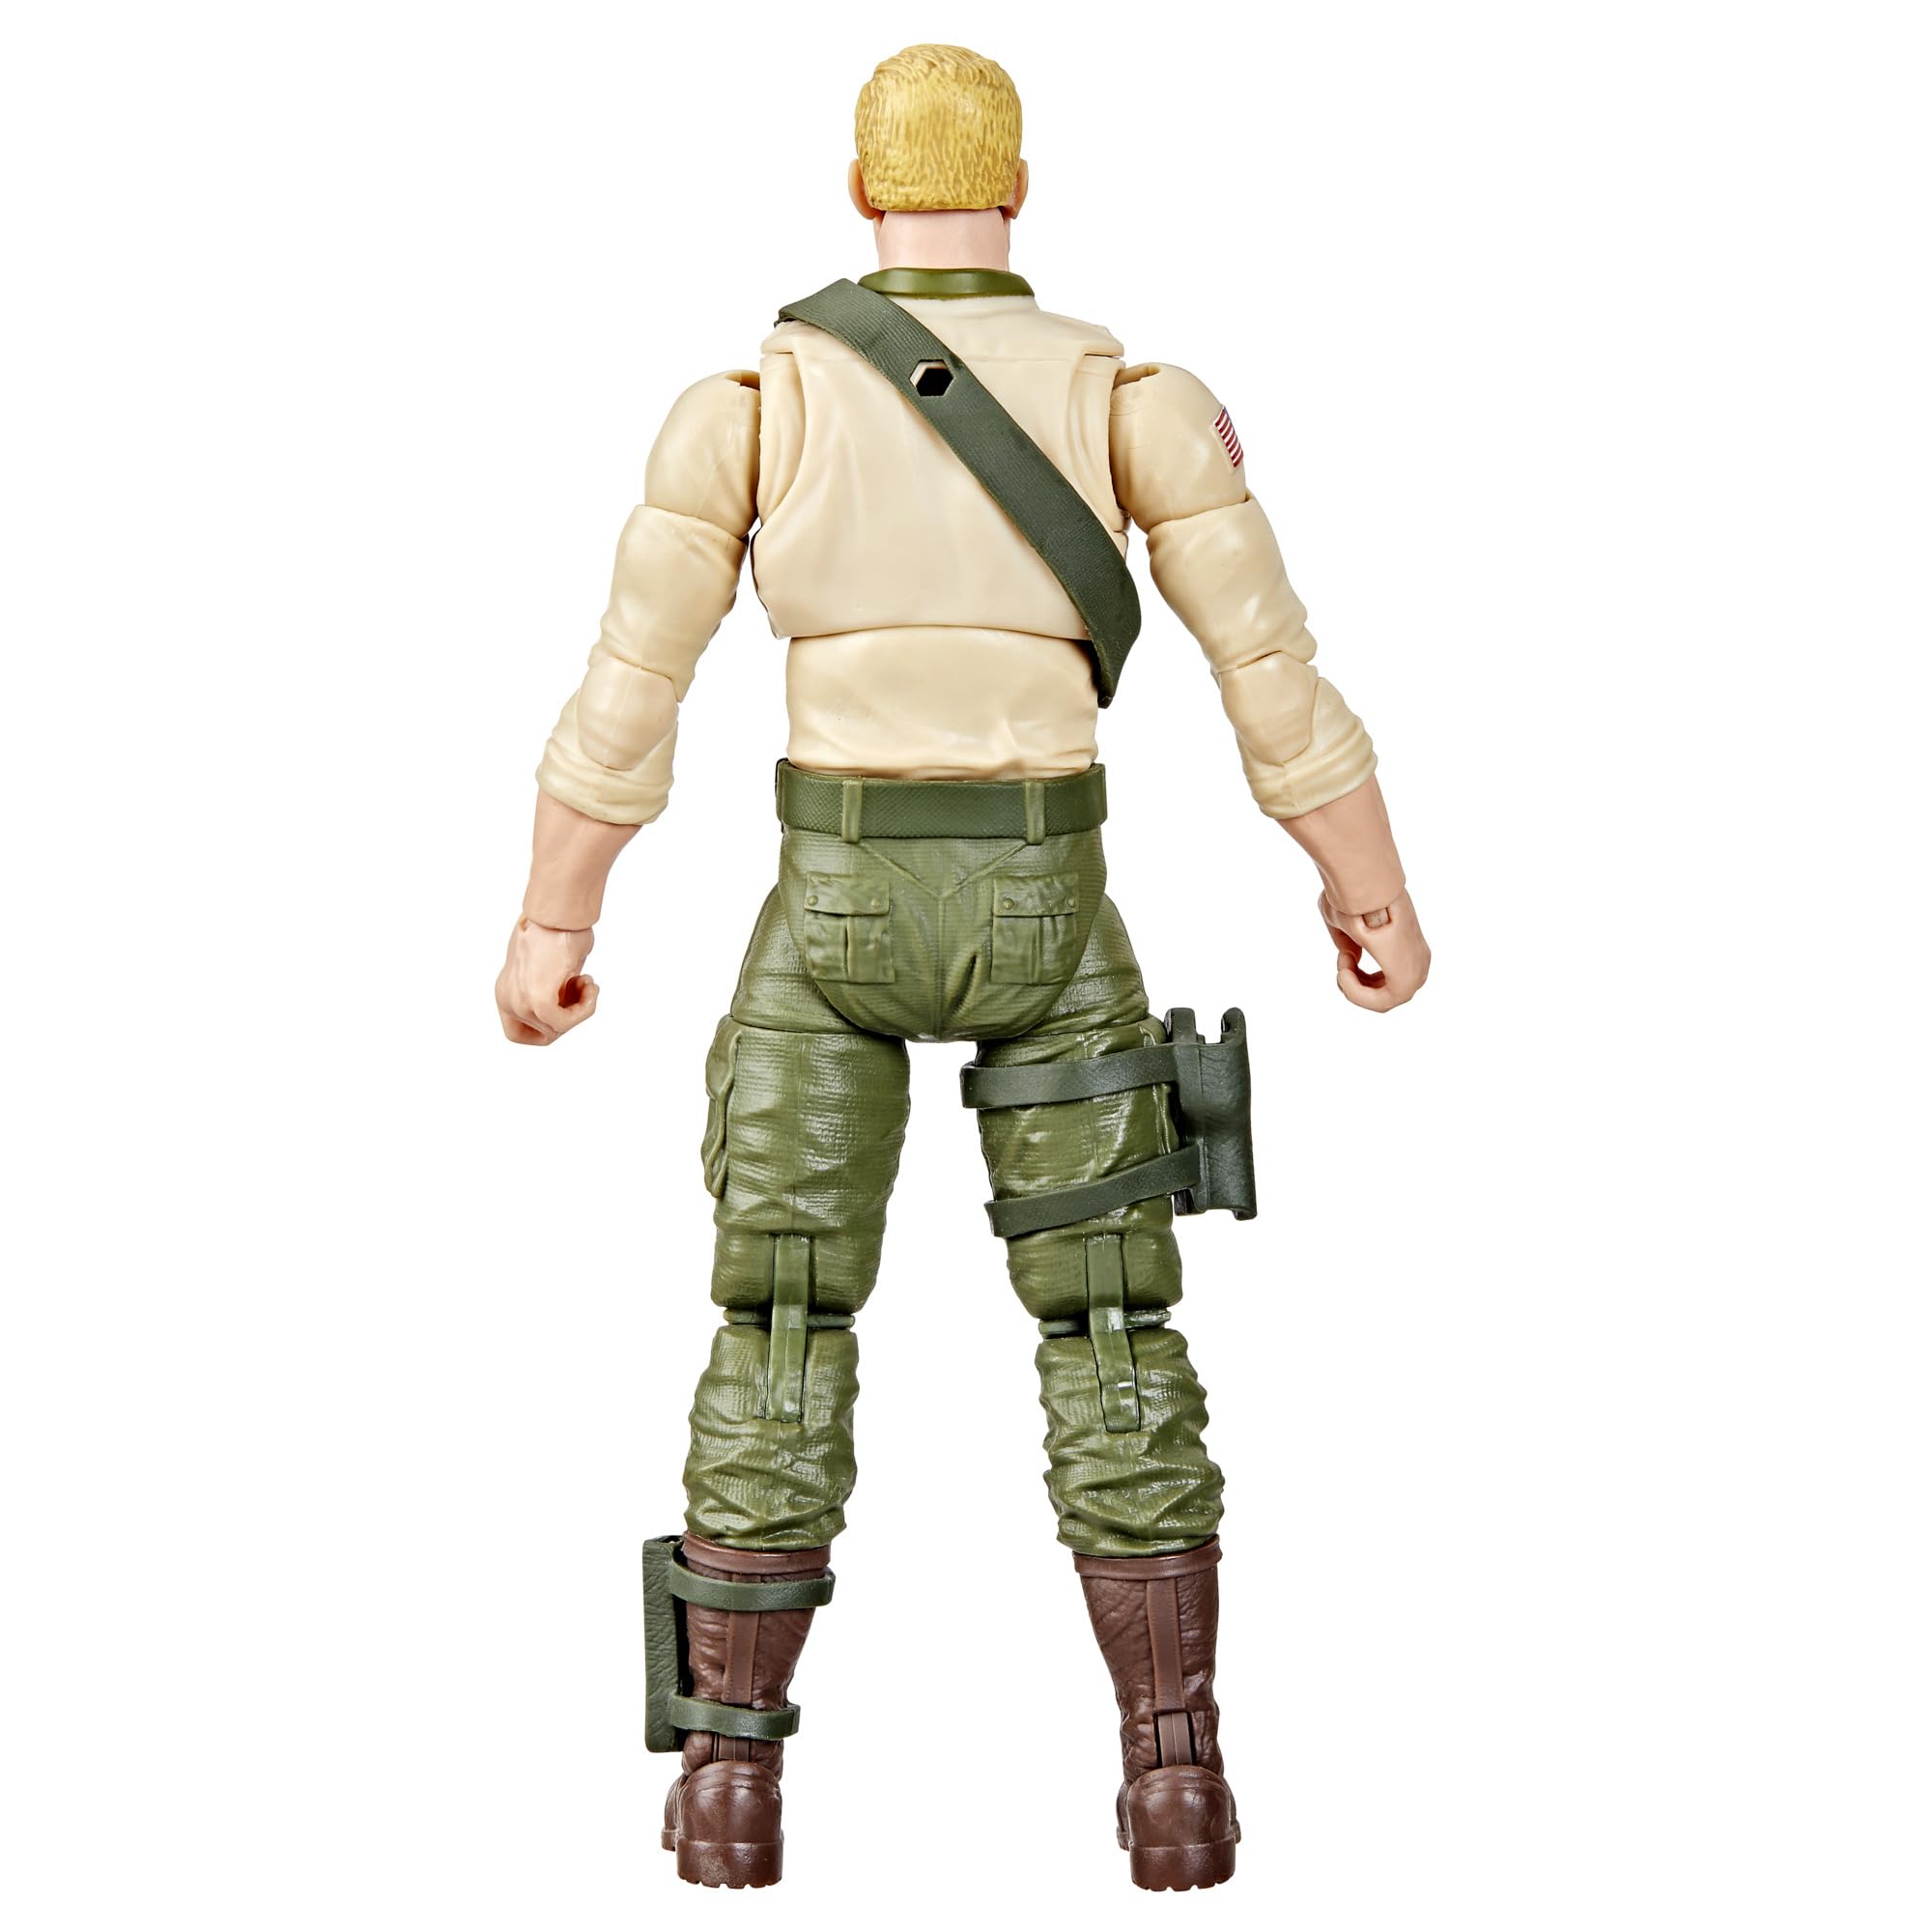 G.I. Joe Classified Series Retro Cardback Duke, Collectible 6-Inch Action Figure with 10 Accessories